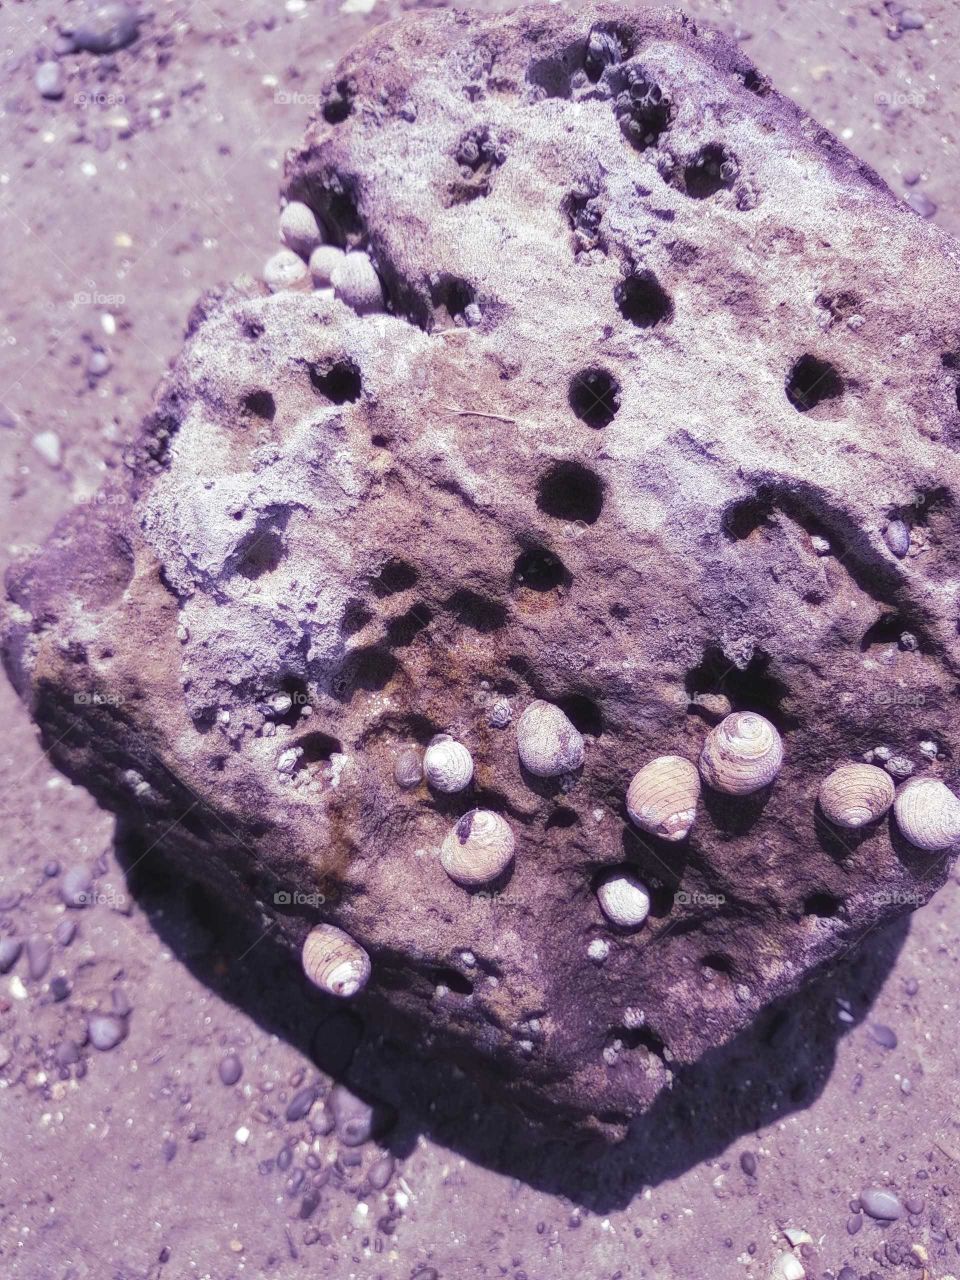 A rock on the sea shore. A home for a few snails and old holes from creatures long ago who lived inside the rock. fossilized.